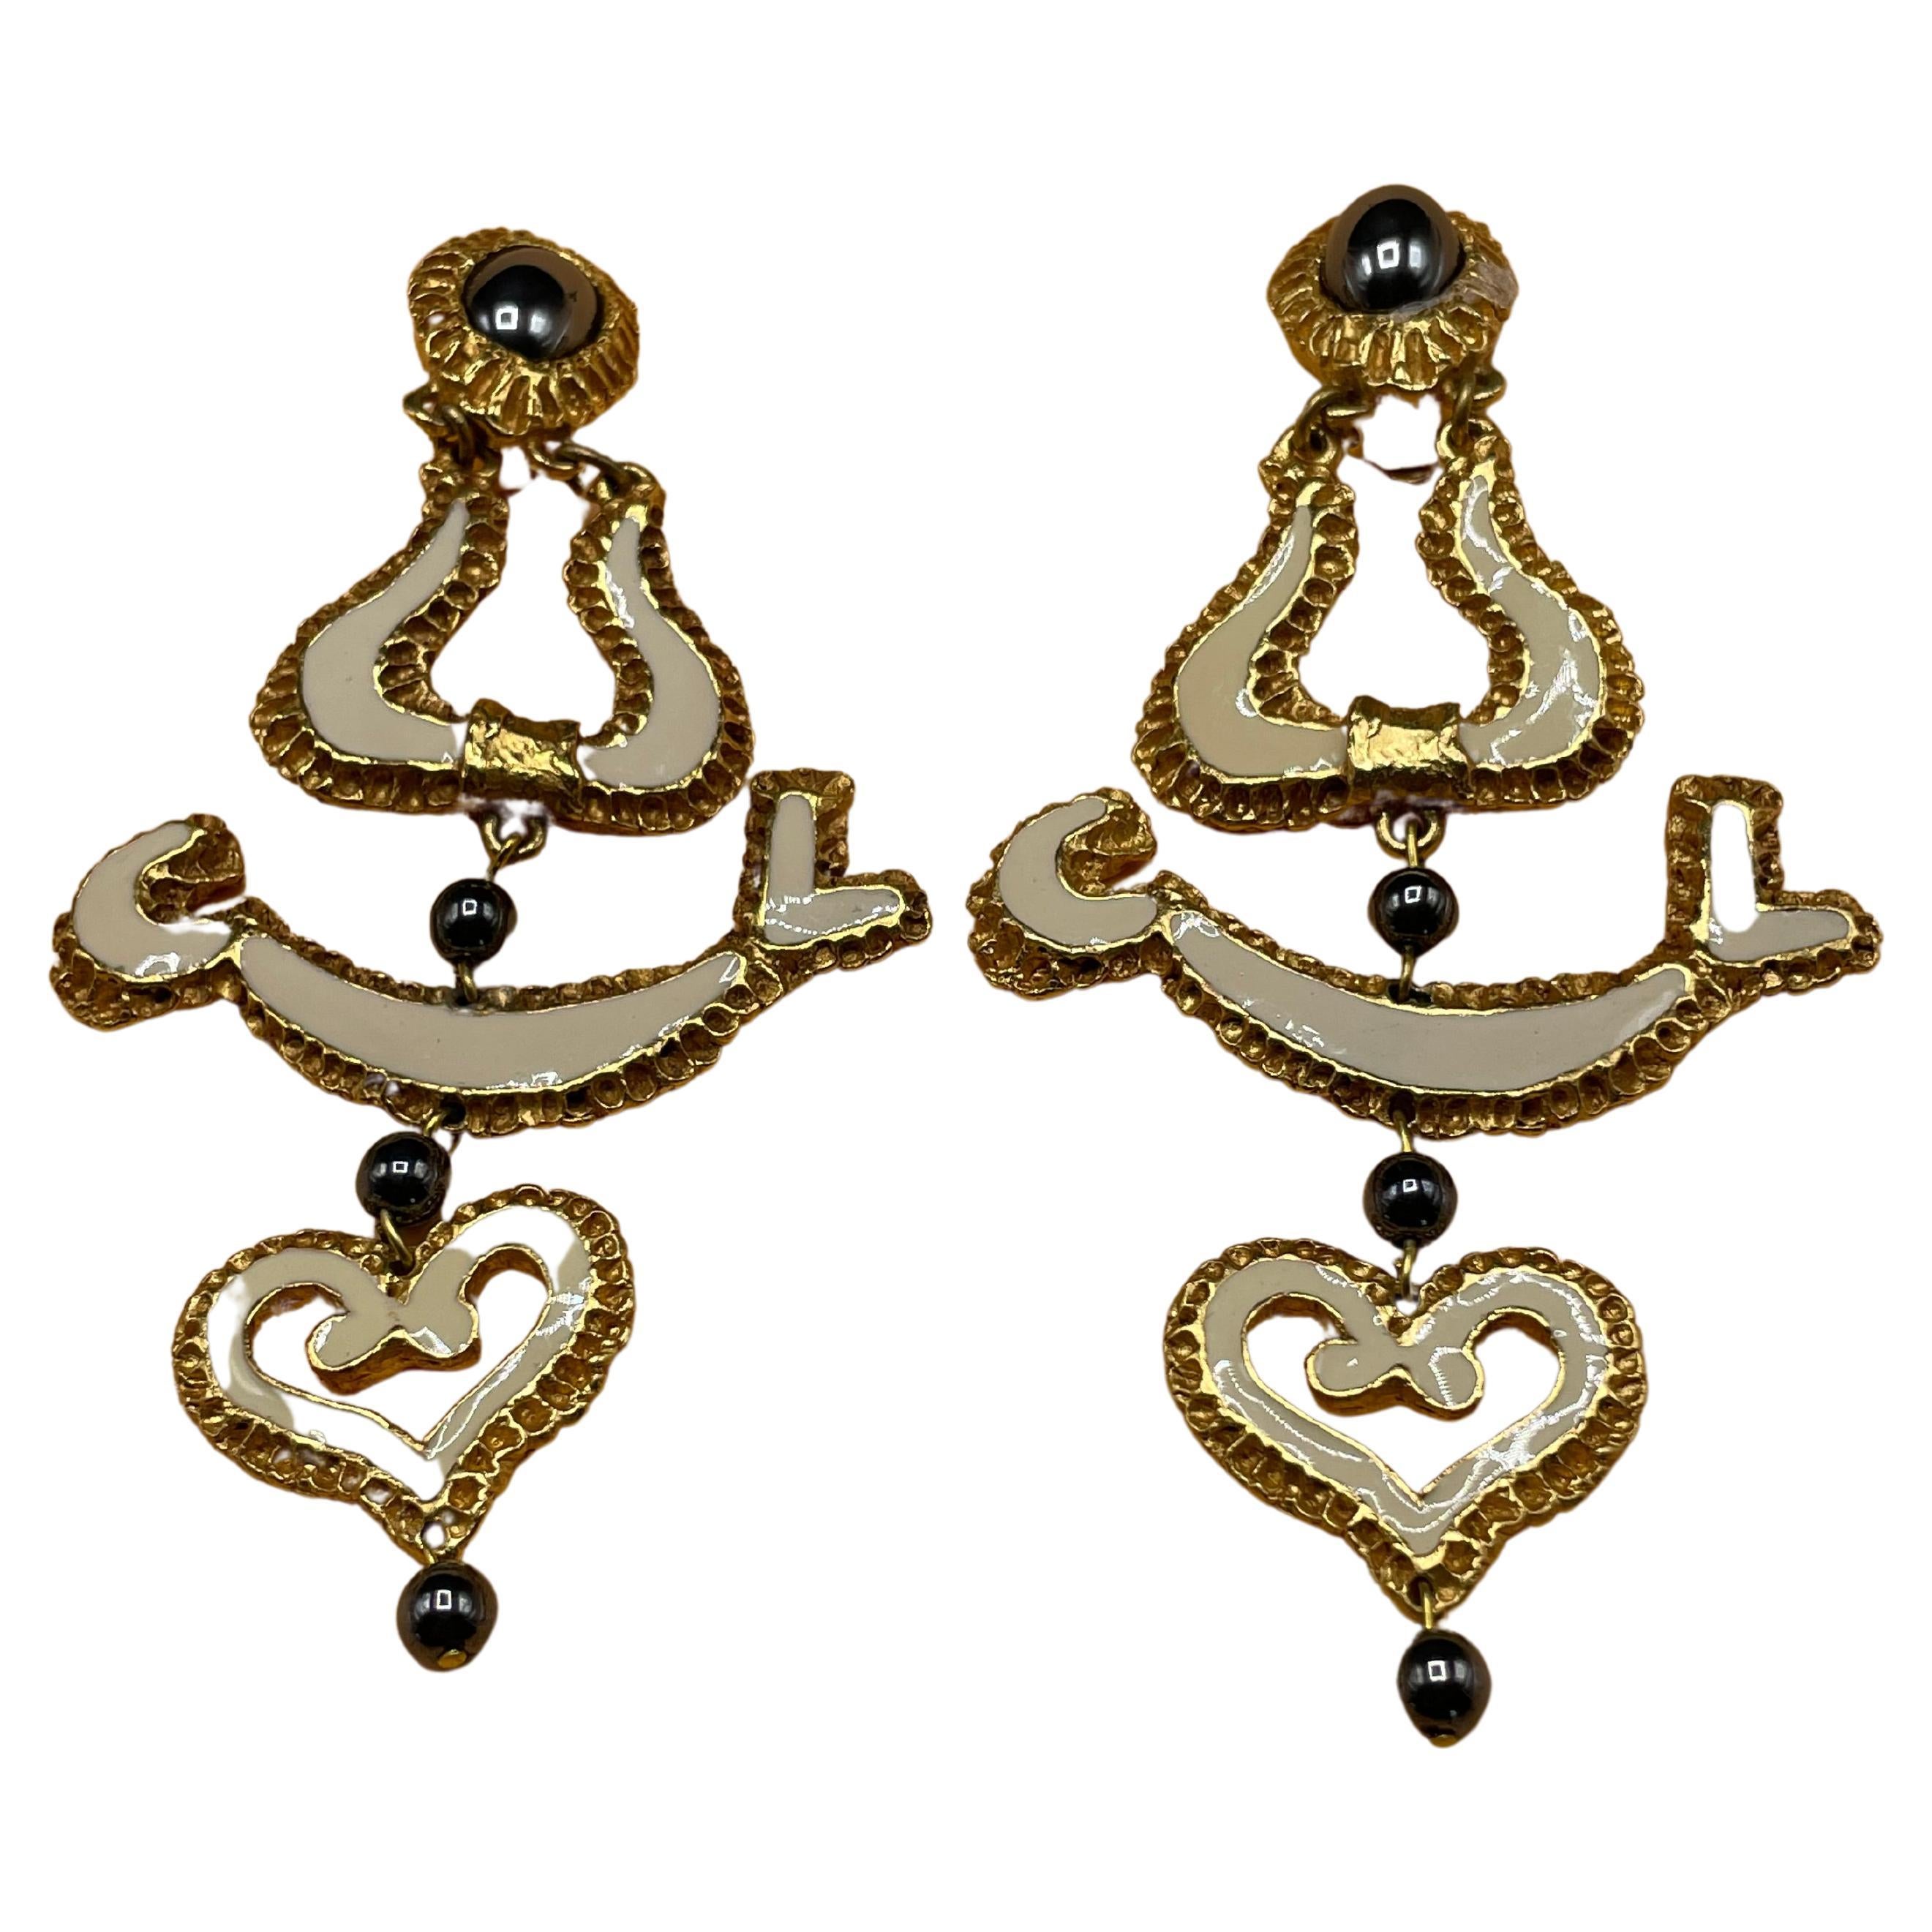 The heart-shaped pattern on the earrings, which Christian Lacroix frequently employed to create his jewelry, is a representation of his creative aesthetic.  Made in France. In perfect condition, and quality. With the Christian Lacroix stamp on the